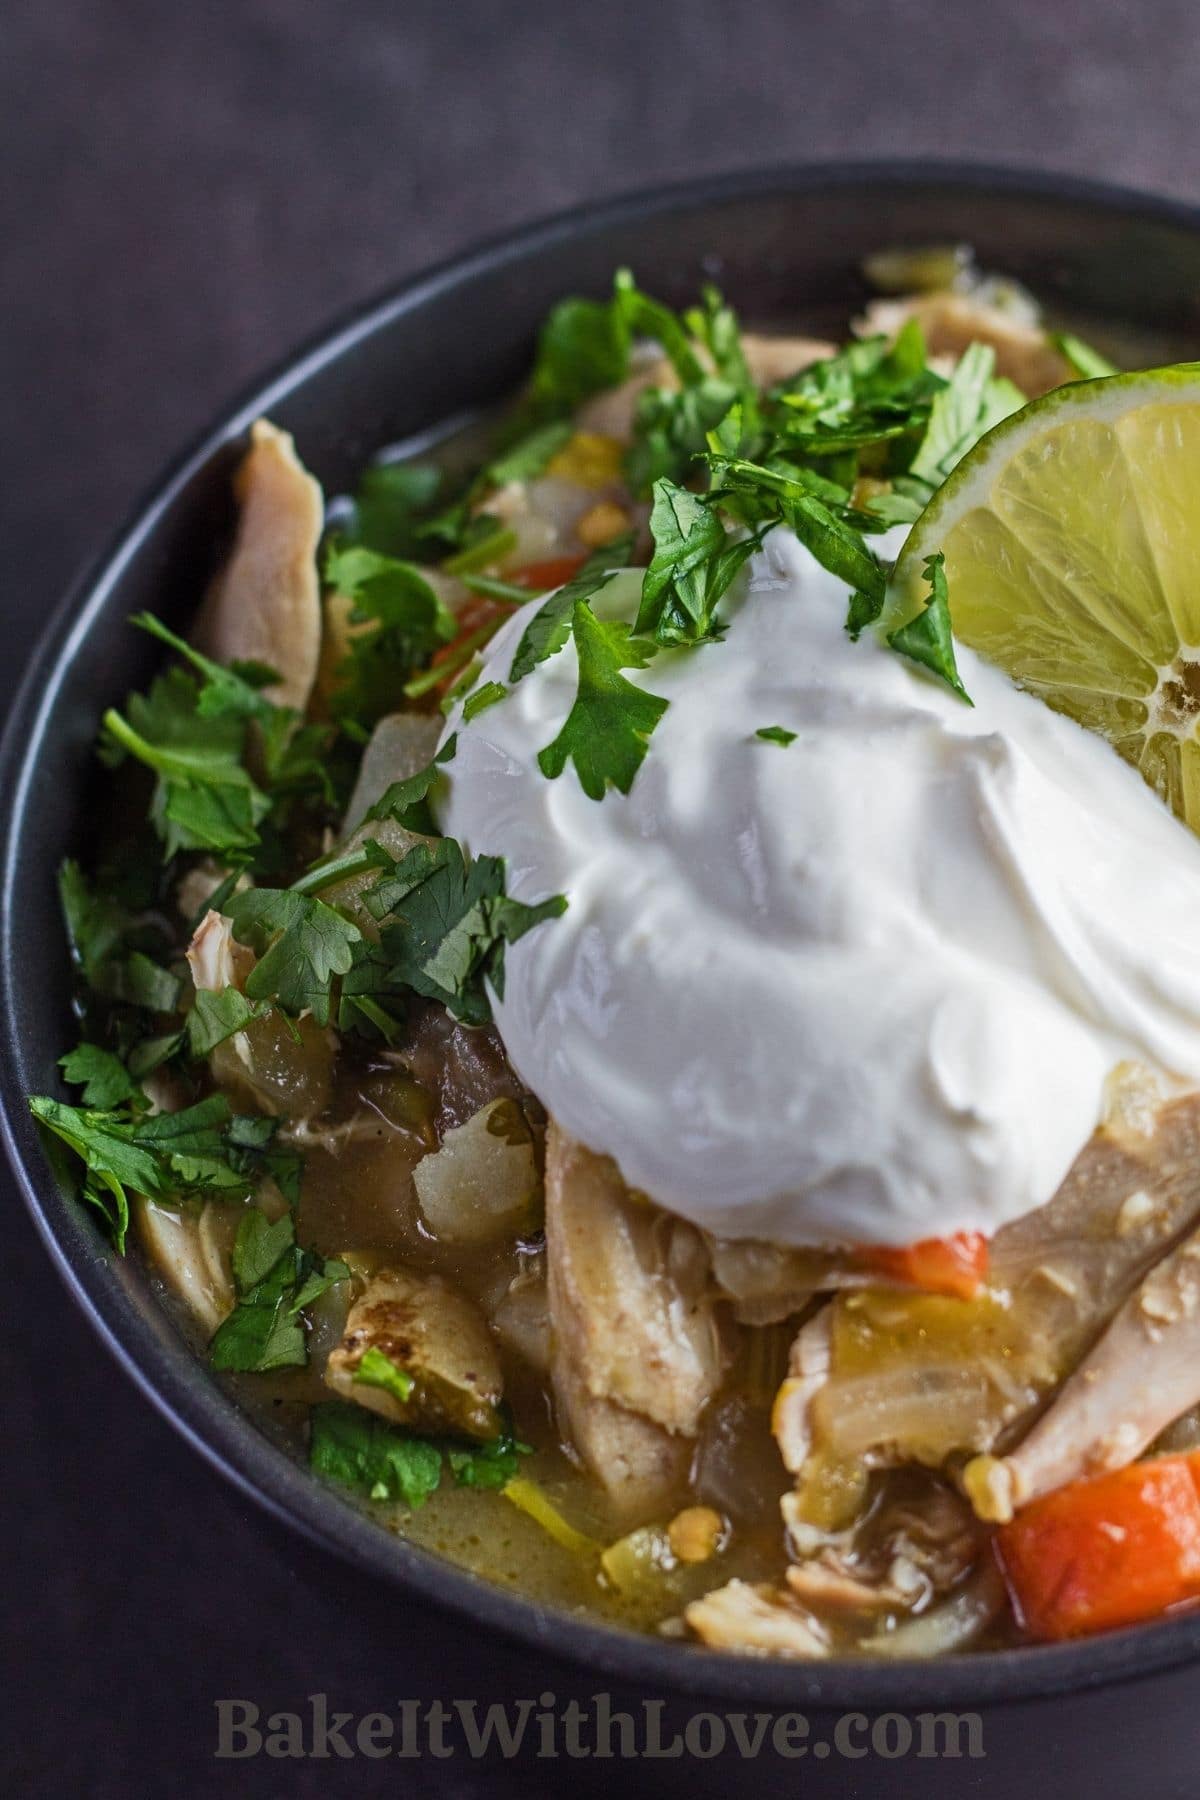 Green chile chicken stew topped with sour cream and cilantro in black bowl.